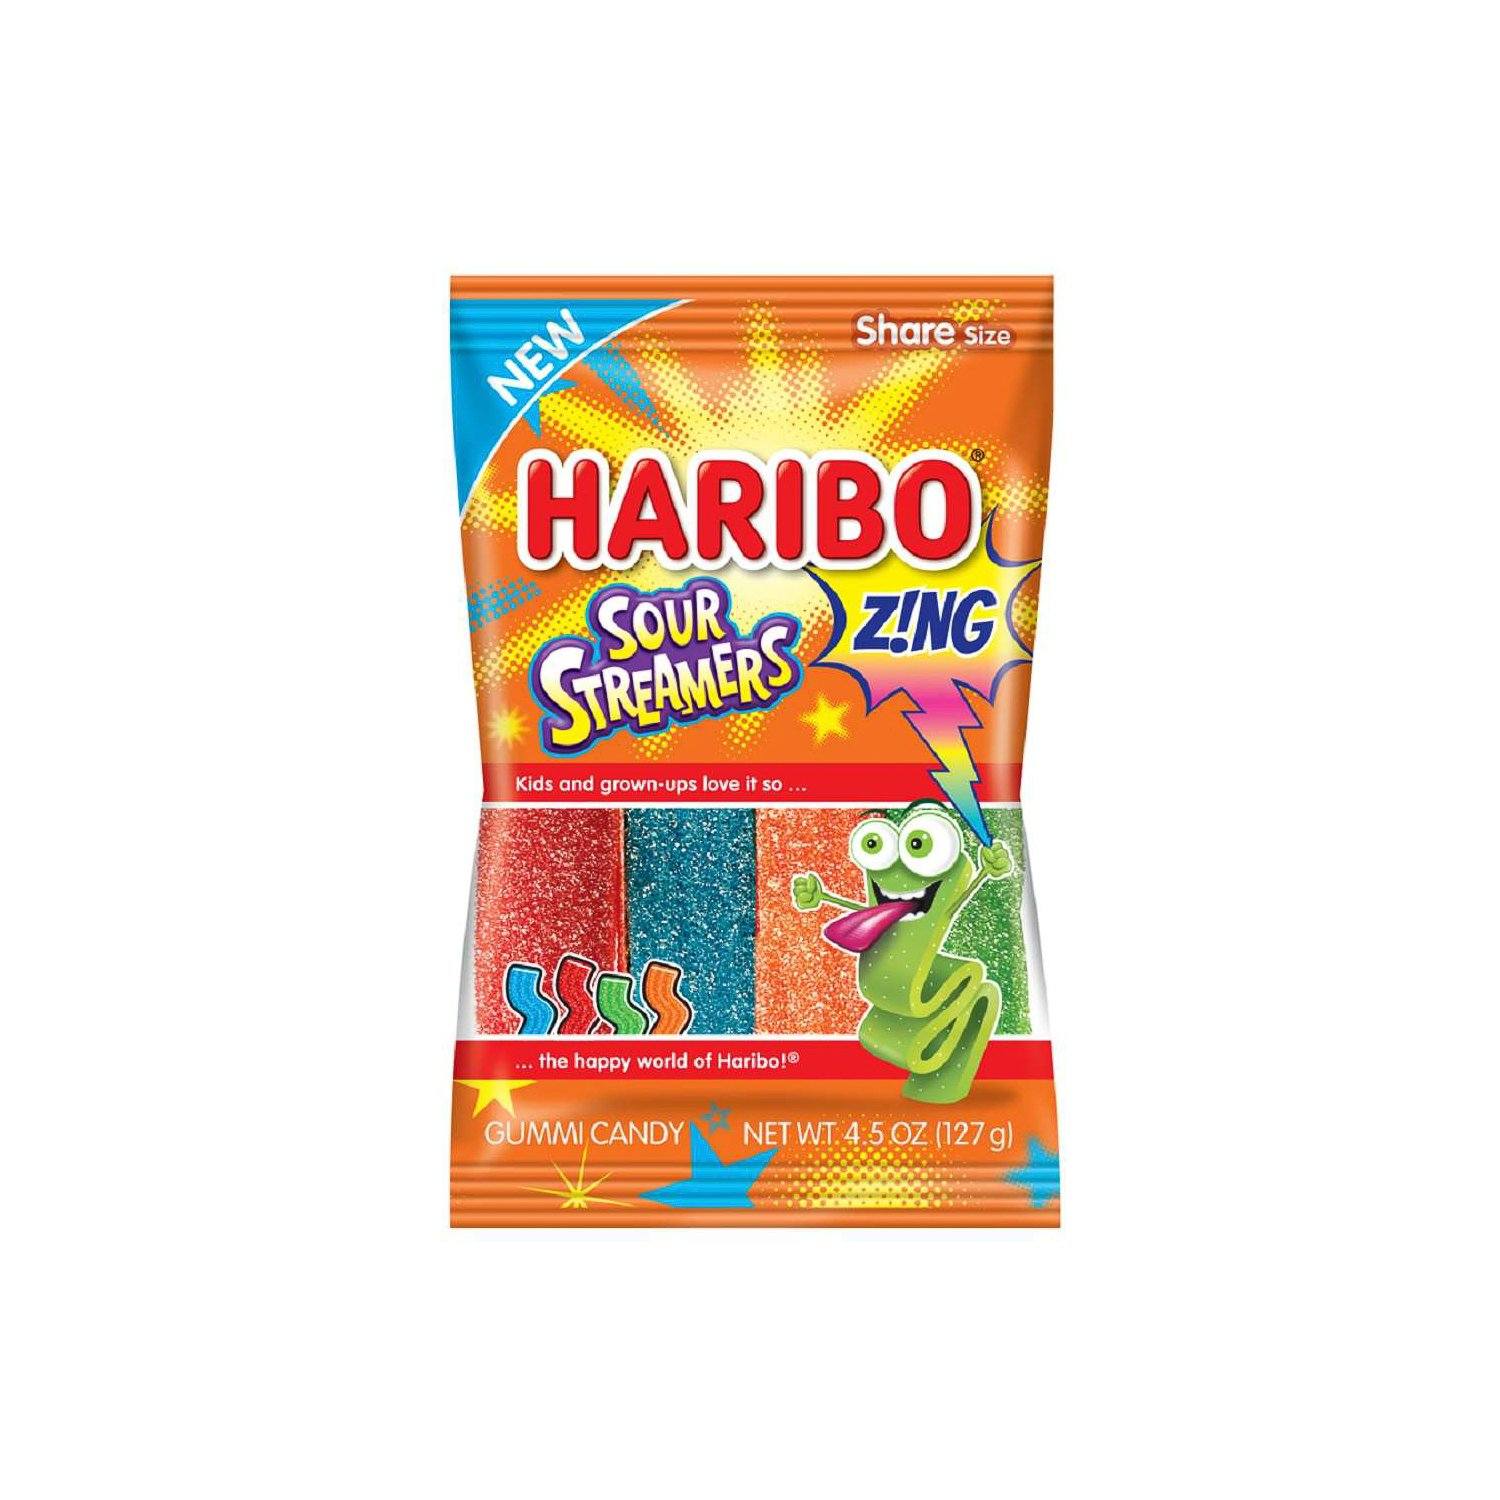 Haribo Gummi Candies Meltable Haribo Sour Streamers 4.5 Ounce 